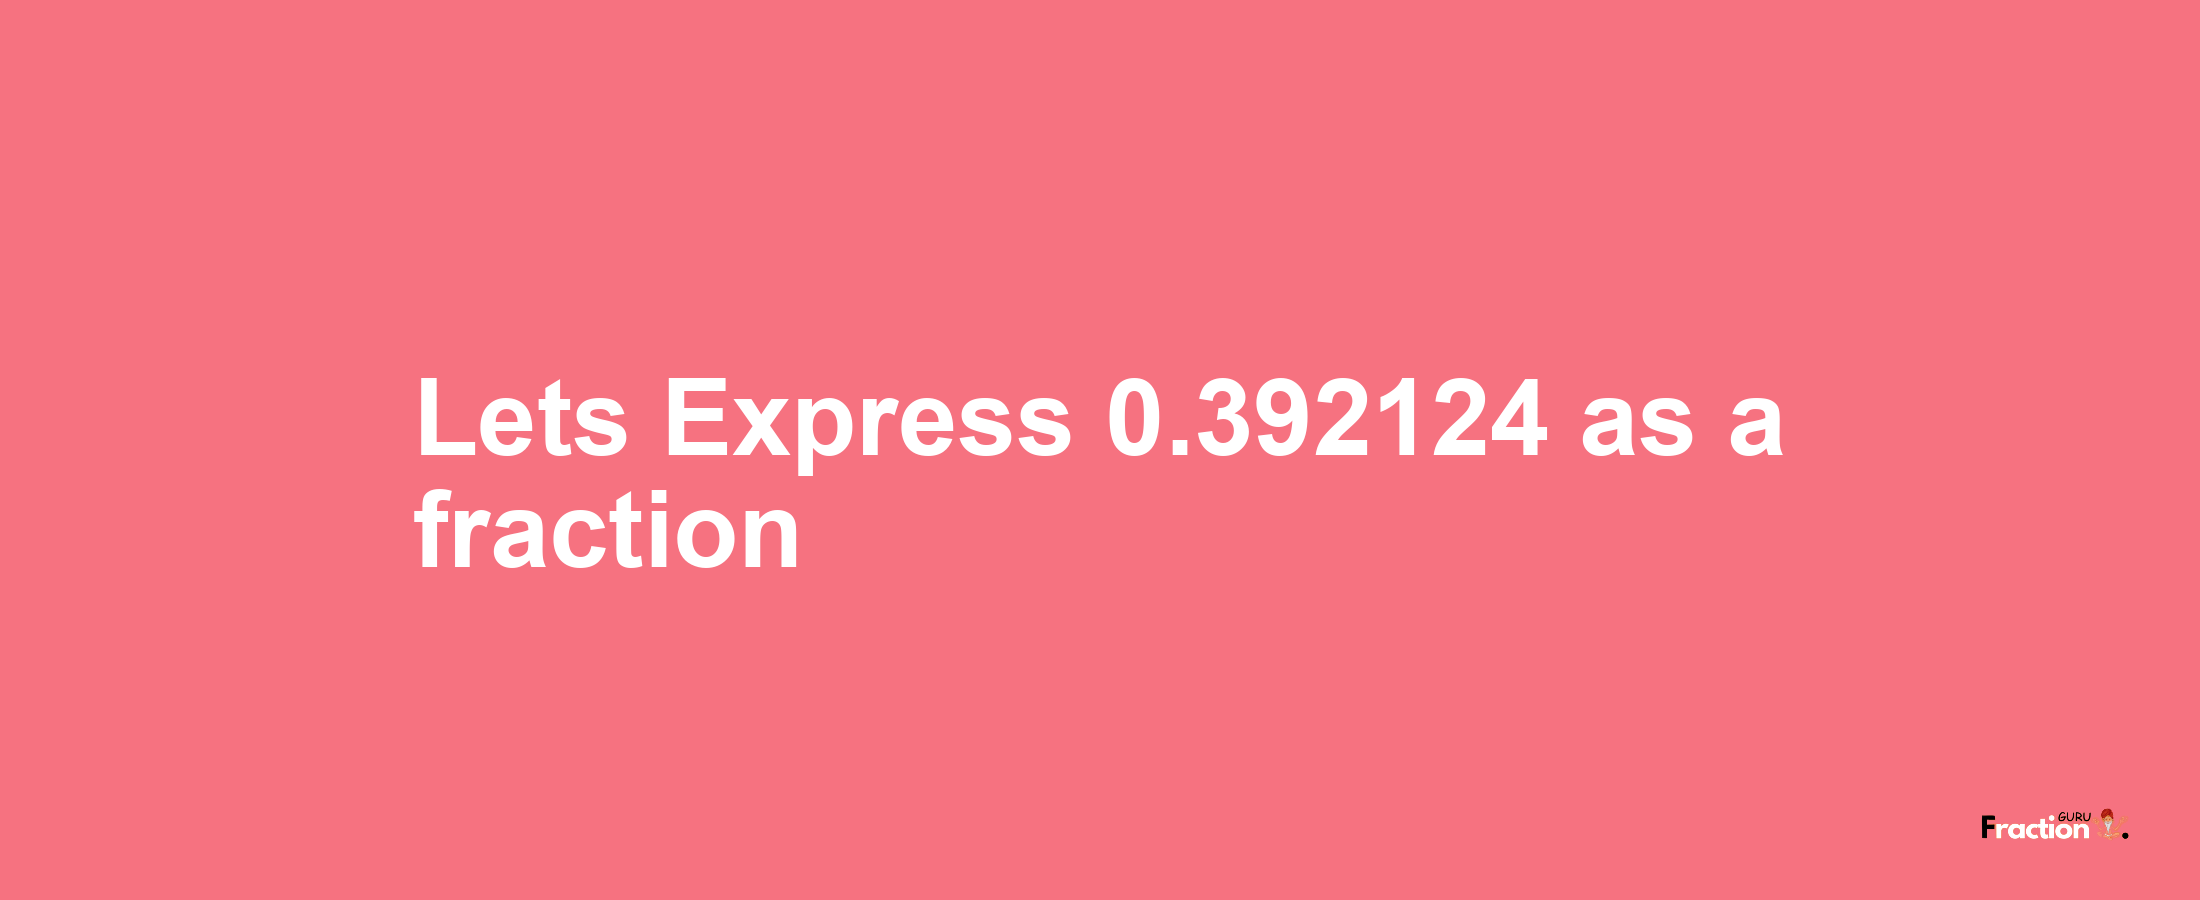 Lets Express 0.392124 as afraction